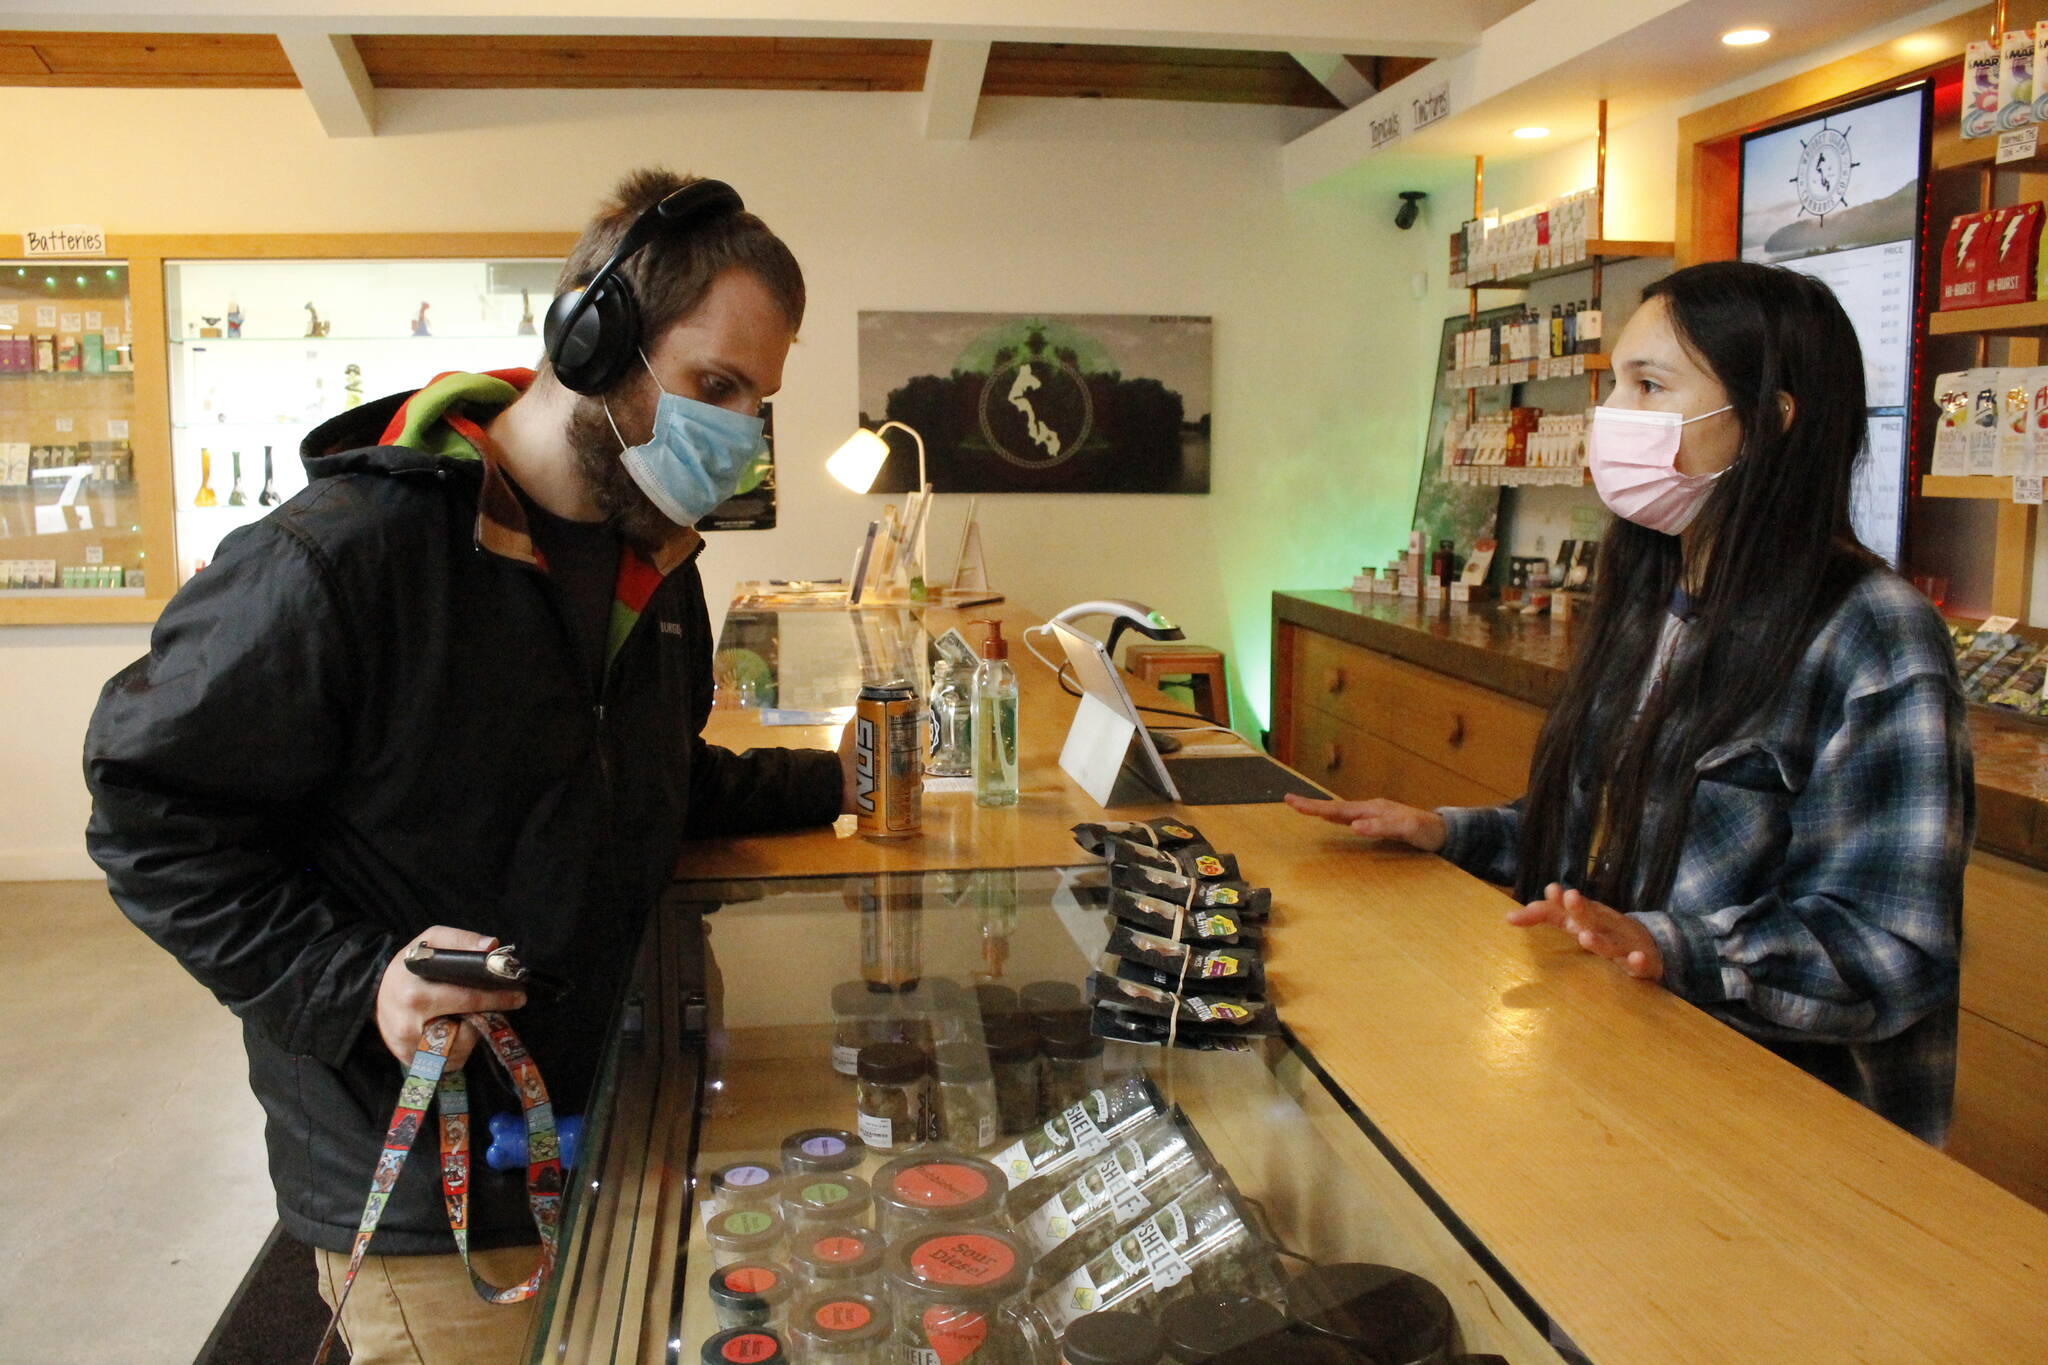 Photo by Kira Erickson/South Whidbey Record
Budtender Kati Sinclair helps customer Ryan Morgan with a purchase at Whidbey Island Cannabis Company.